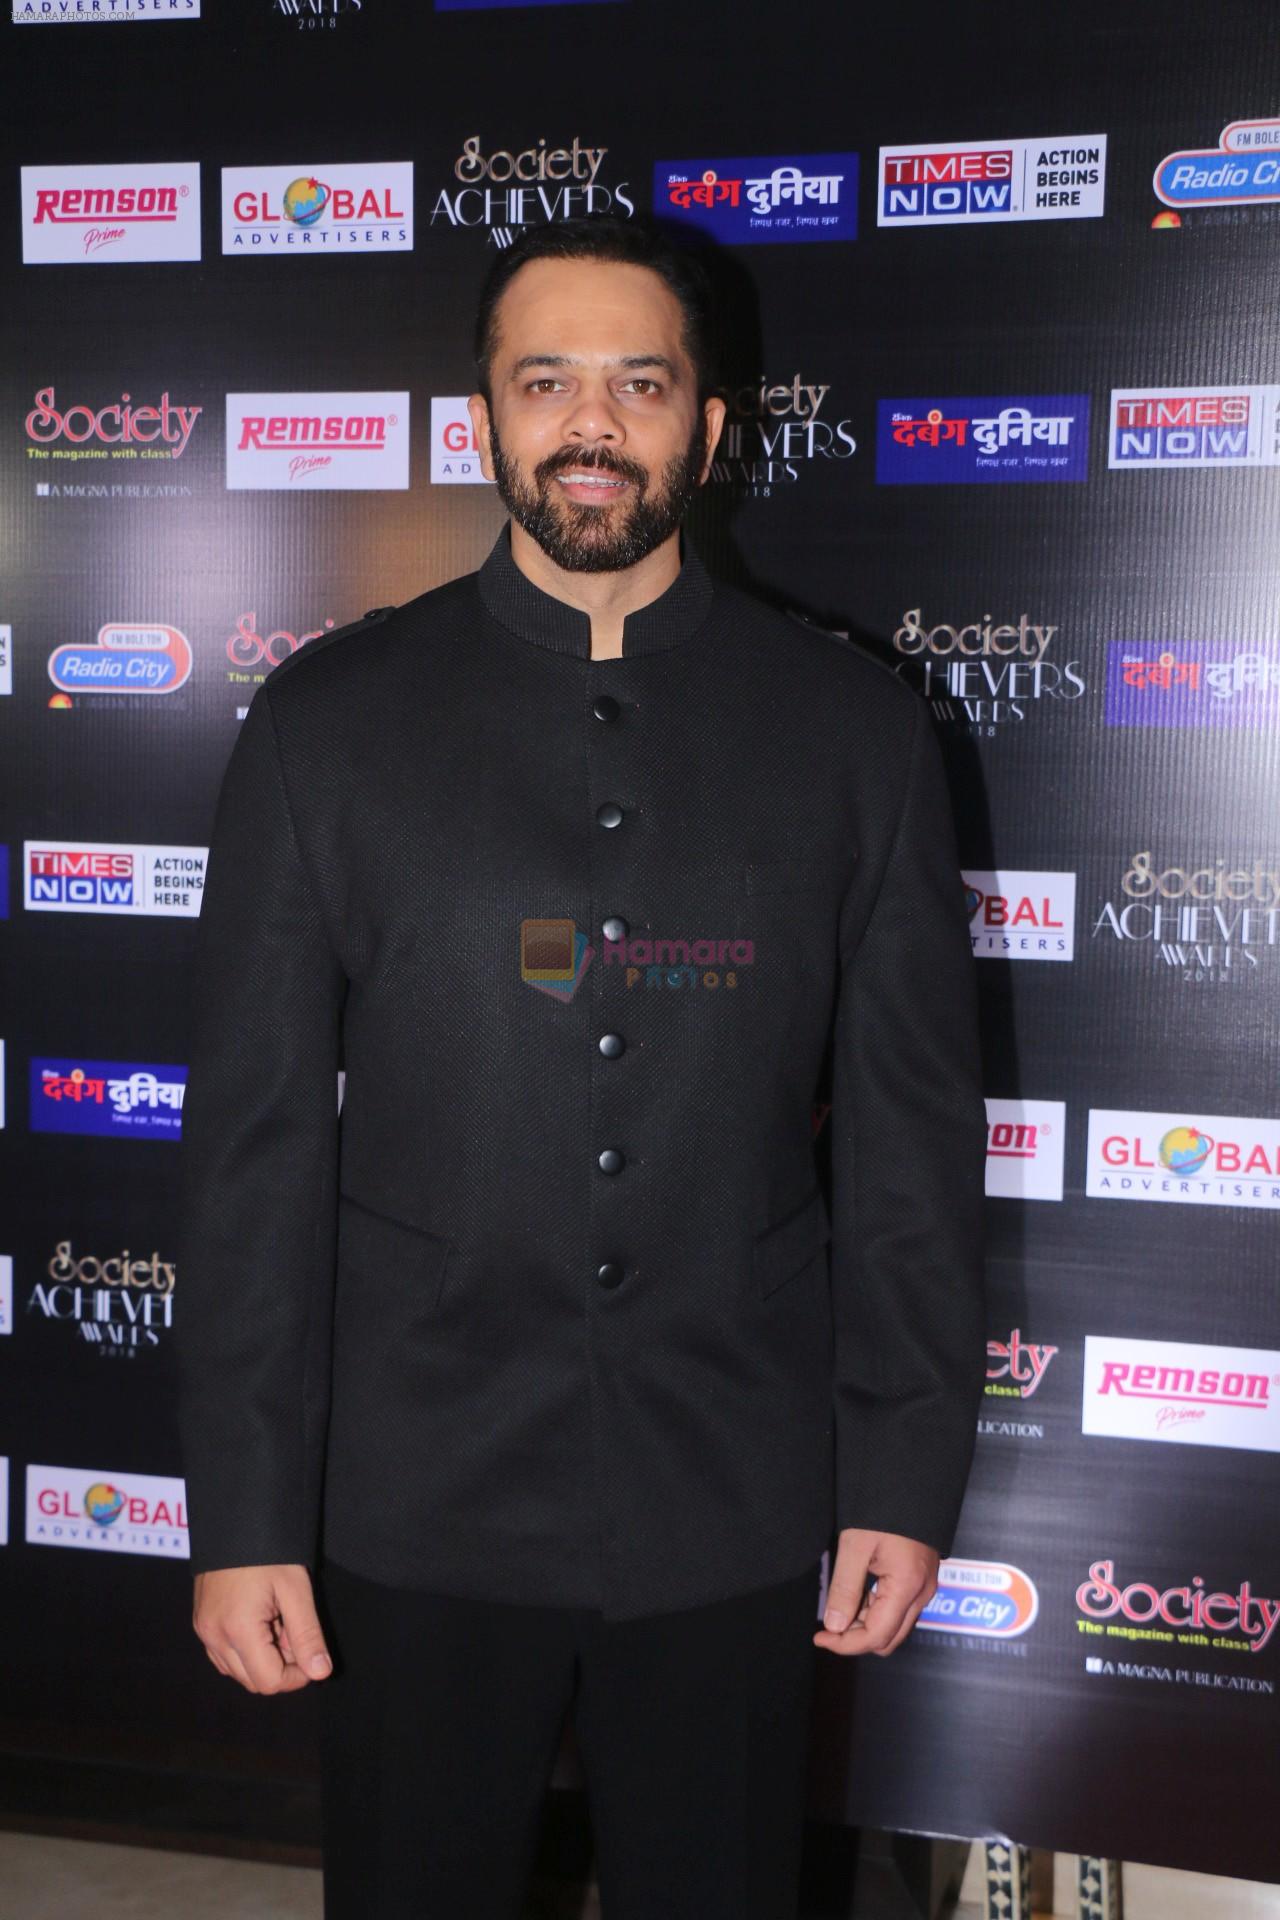 Rohit Shetty attend Society Achievers Awards 2018 on 14th Jan 2018